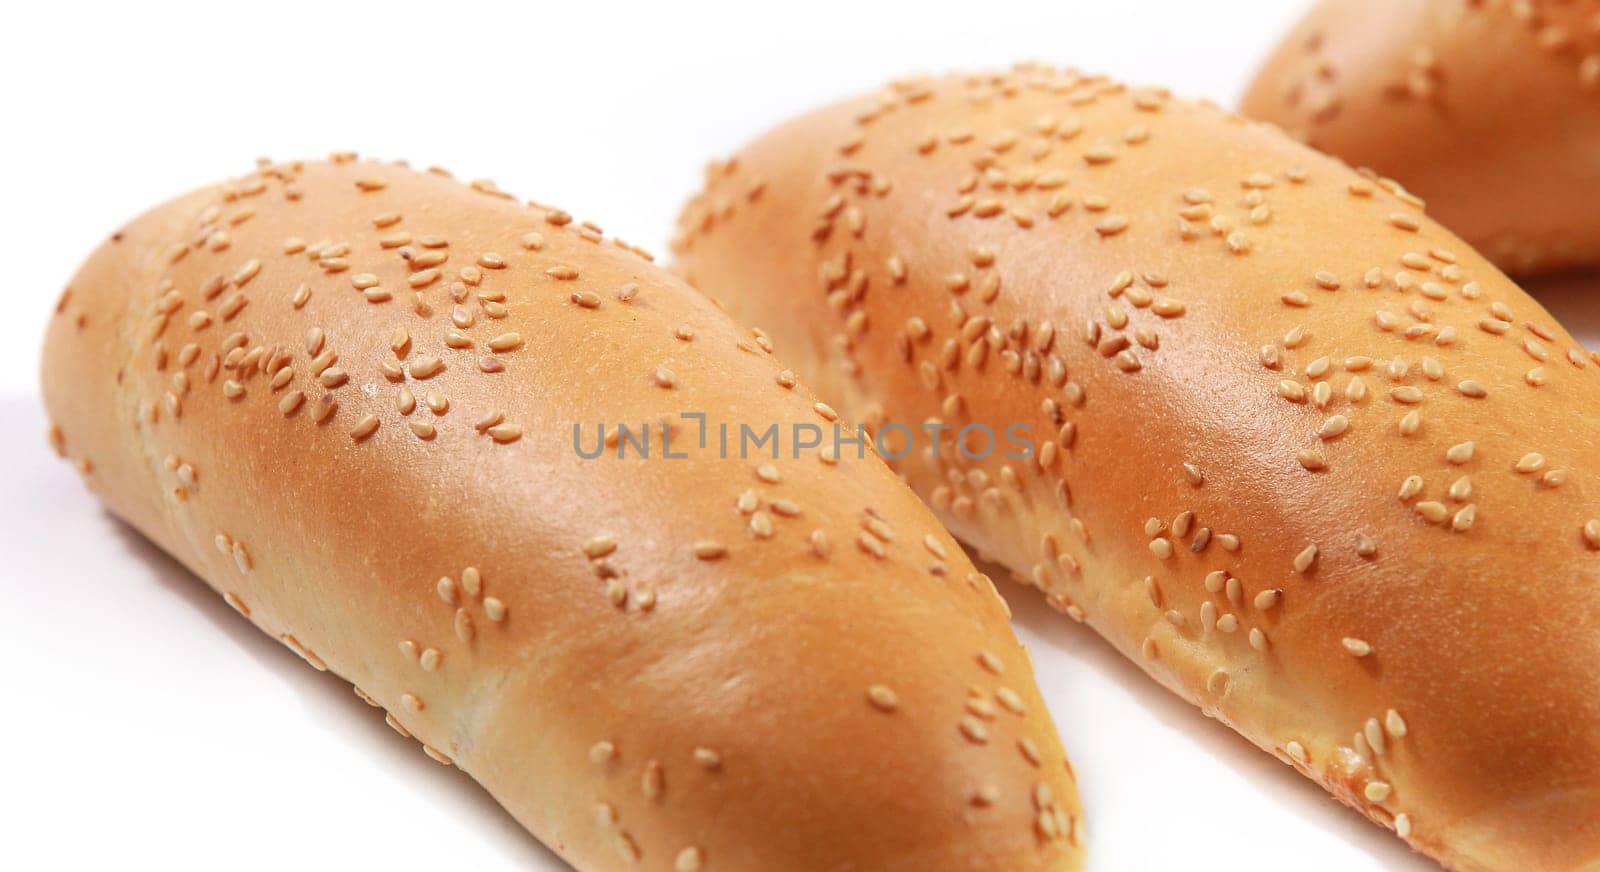 Bread baguettes with sesame seeds isolated on white background, white rustic Bakery food concept. Industrial baking bread made from white flour. Freshly organic baked bread.